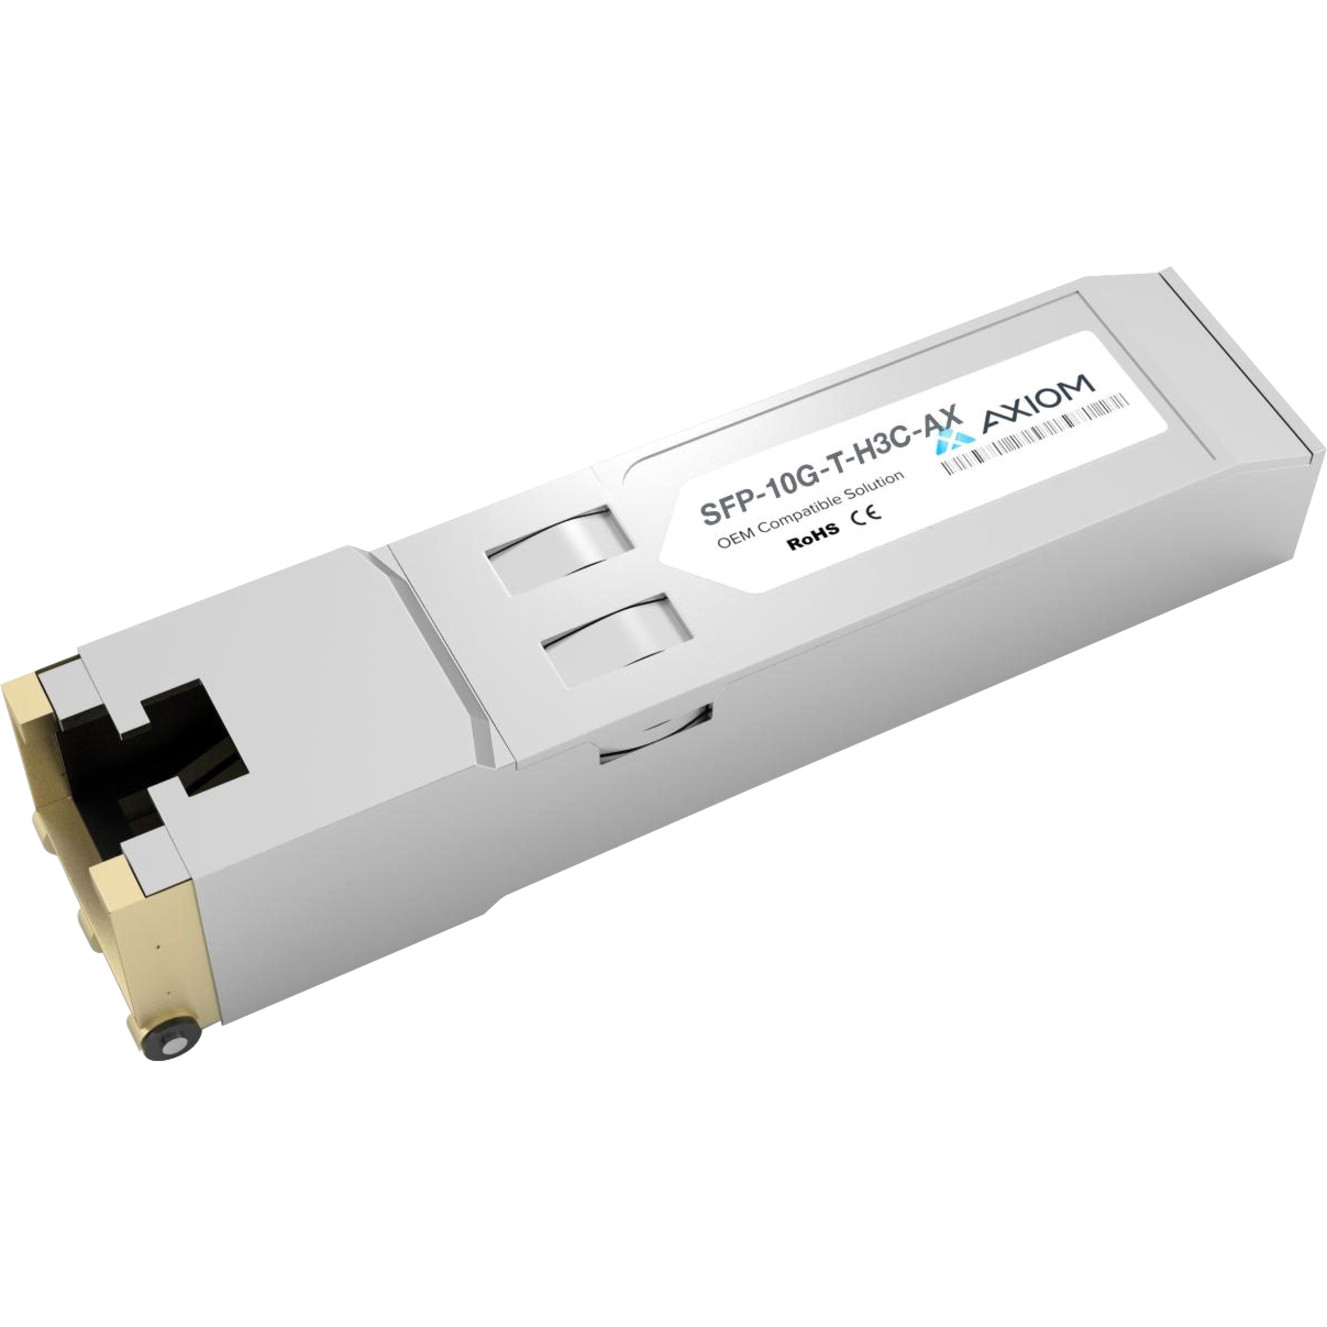 Axiom 10GBASE-T SFP+ Transceiver for HPSFP-10G-T-H3C100% HP Compatible 10GBASE-T SFP+ SFP-10G-T-H3C-AX